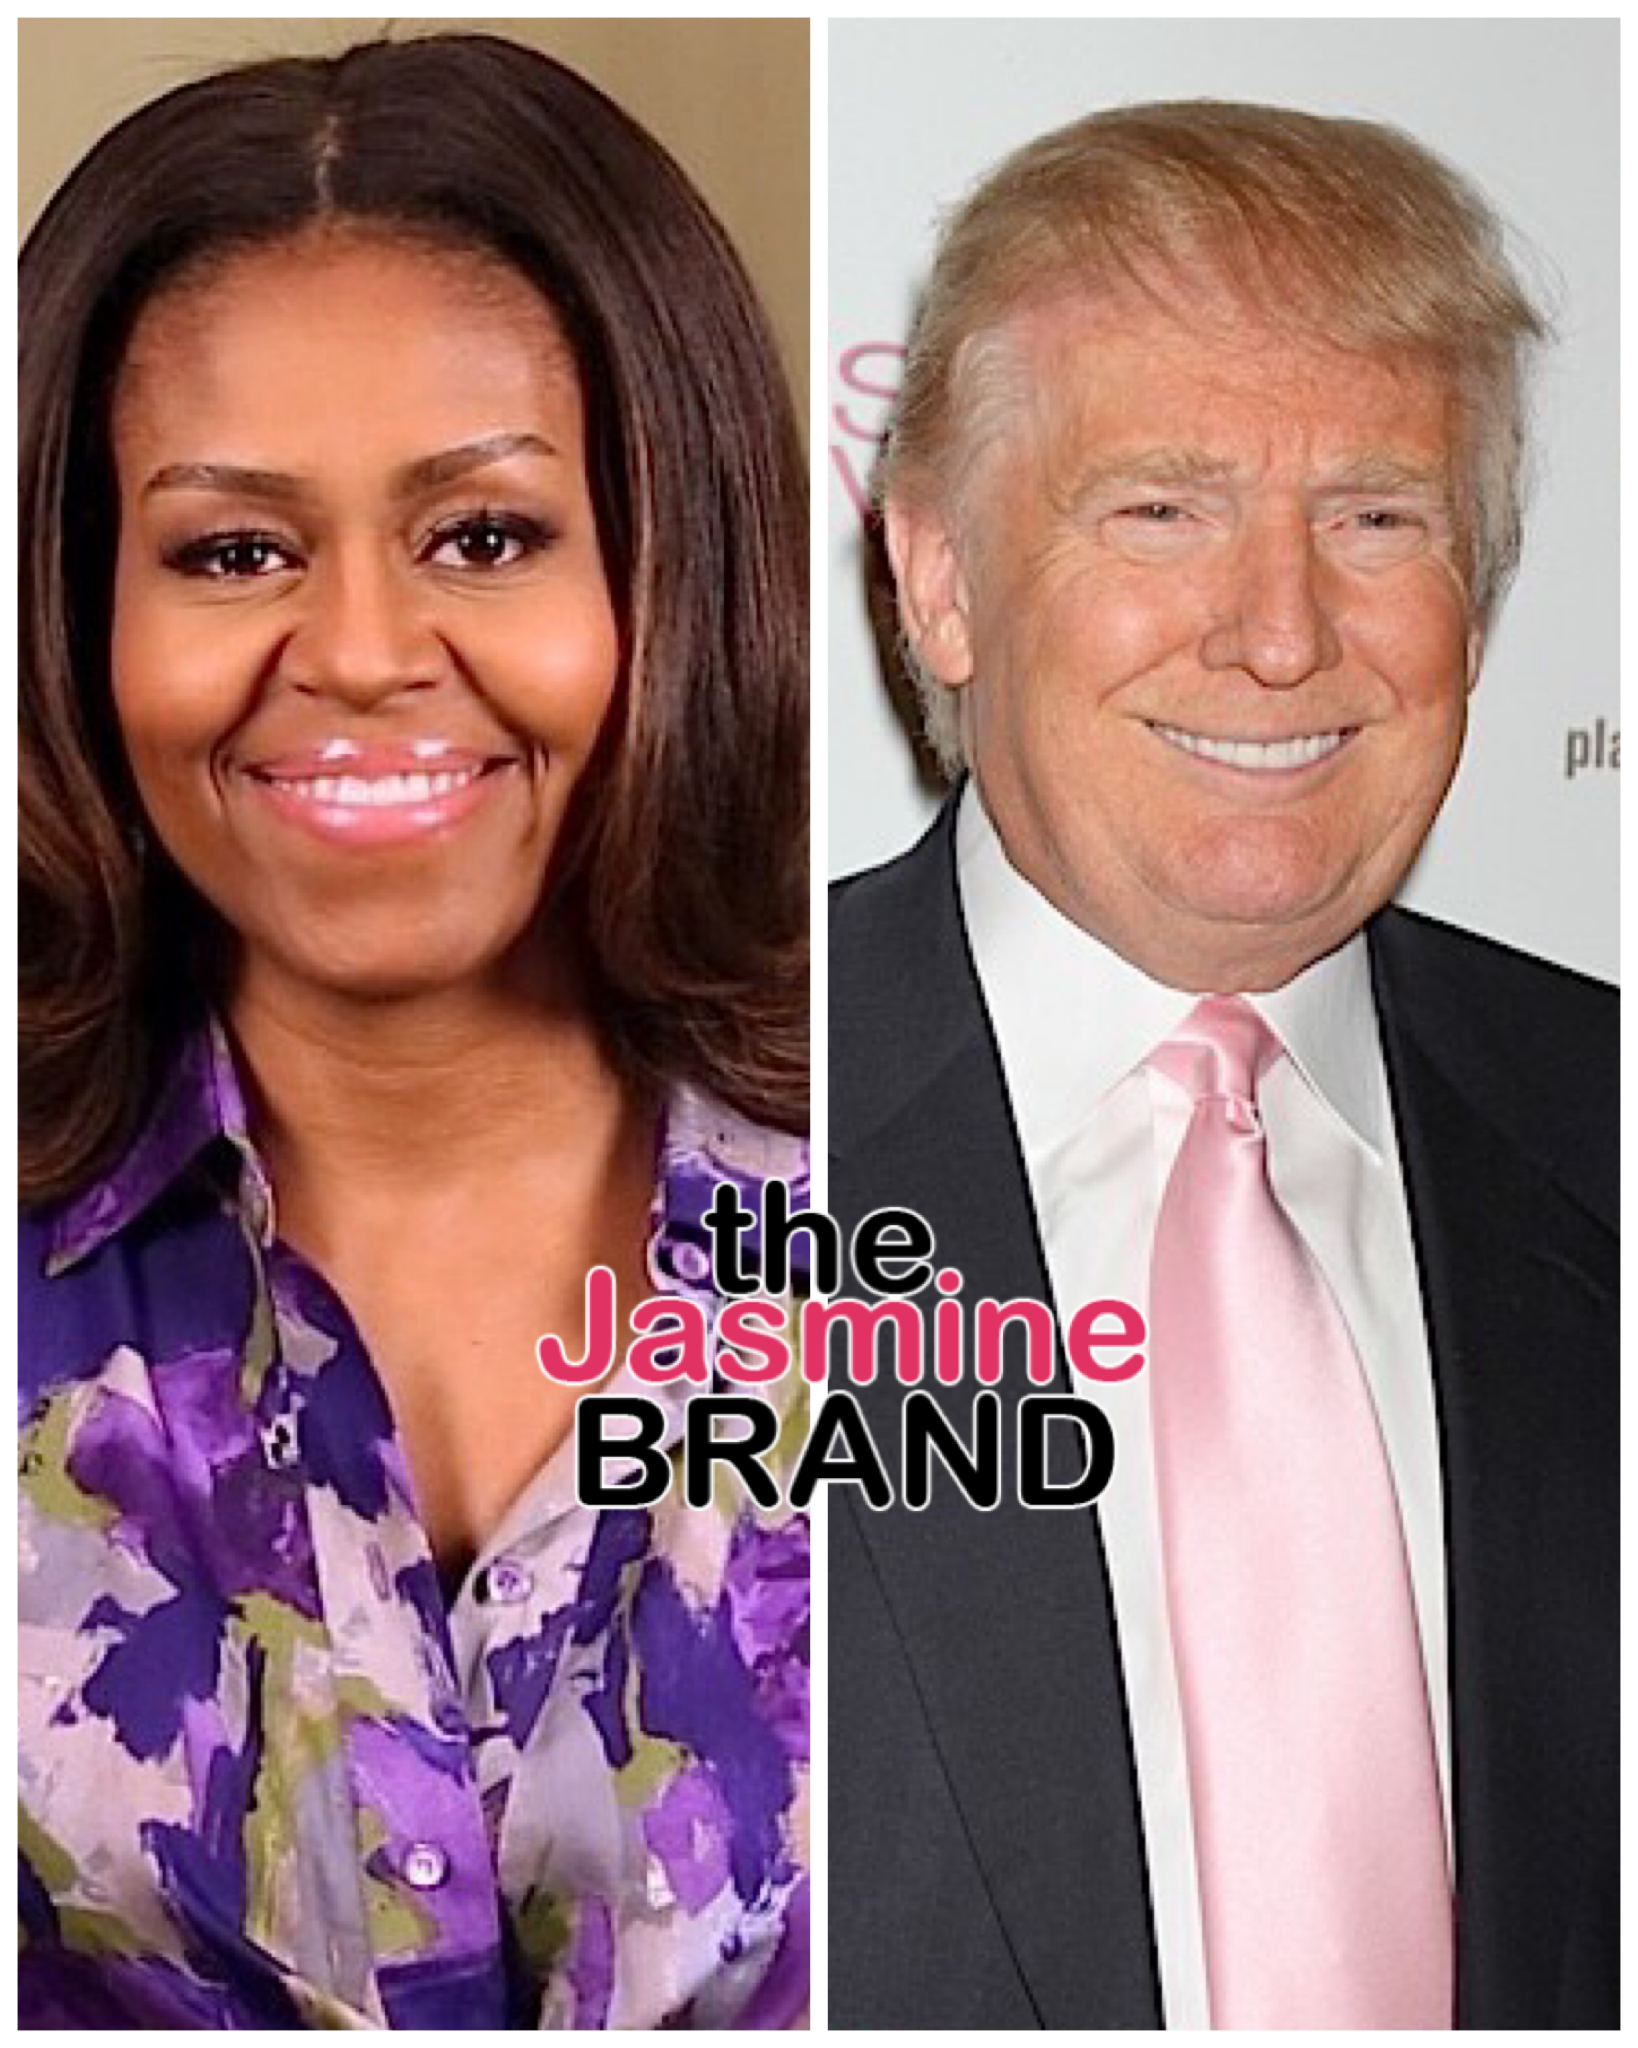 Michelle Obama Pussy Porn - Michelle Obama Feels That Trump's Actions Are Things Her Family 'Could've  Never Gotten Away With' While In Office - theJasmineBRAND